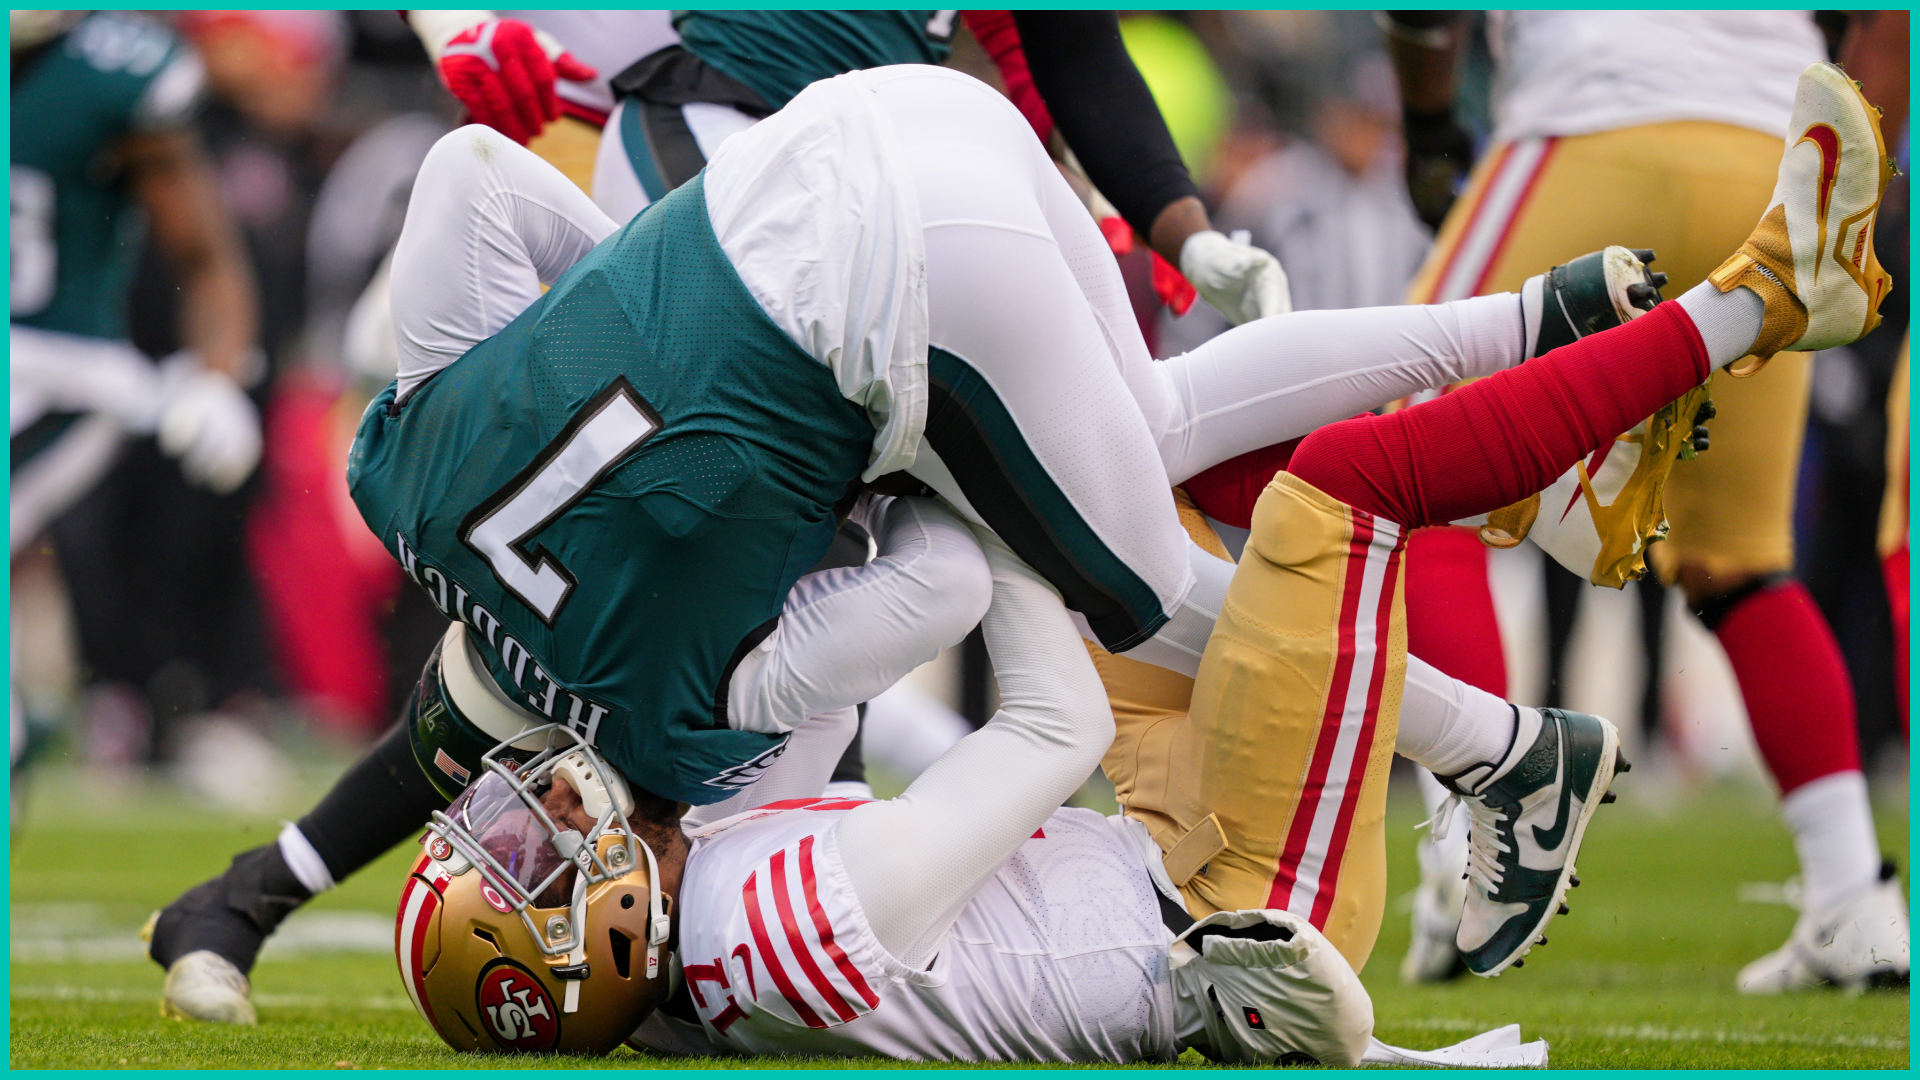 NFL Eagles player flipping over 49ers player during tackle